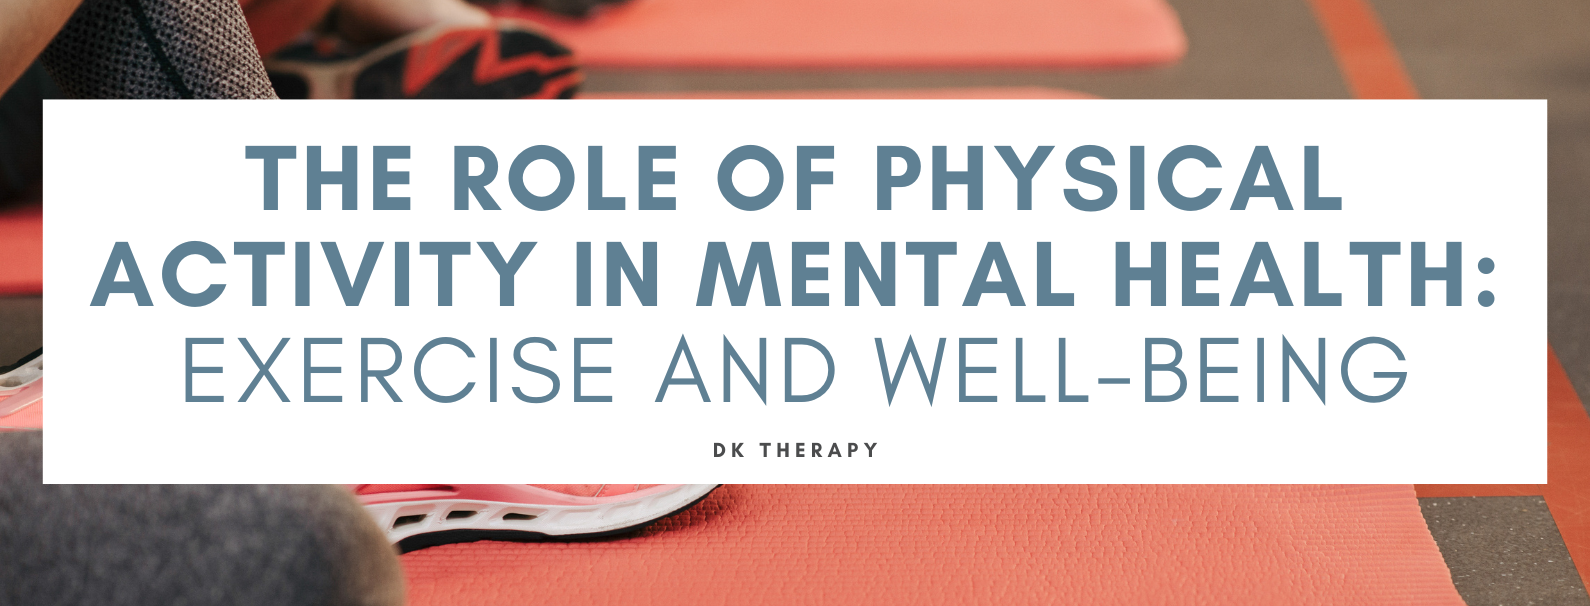 The Role of Physical Activity in Mental Health Exercise and Well-Being